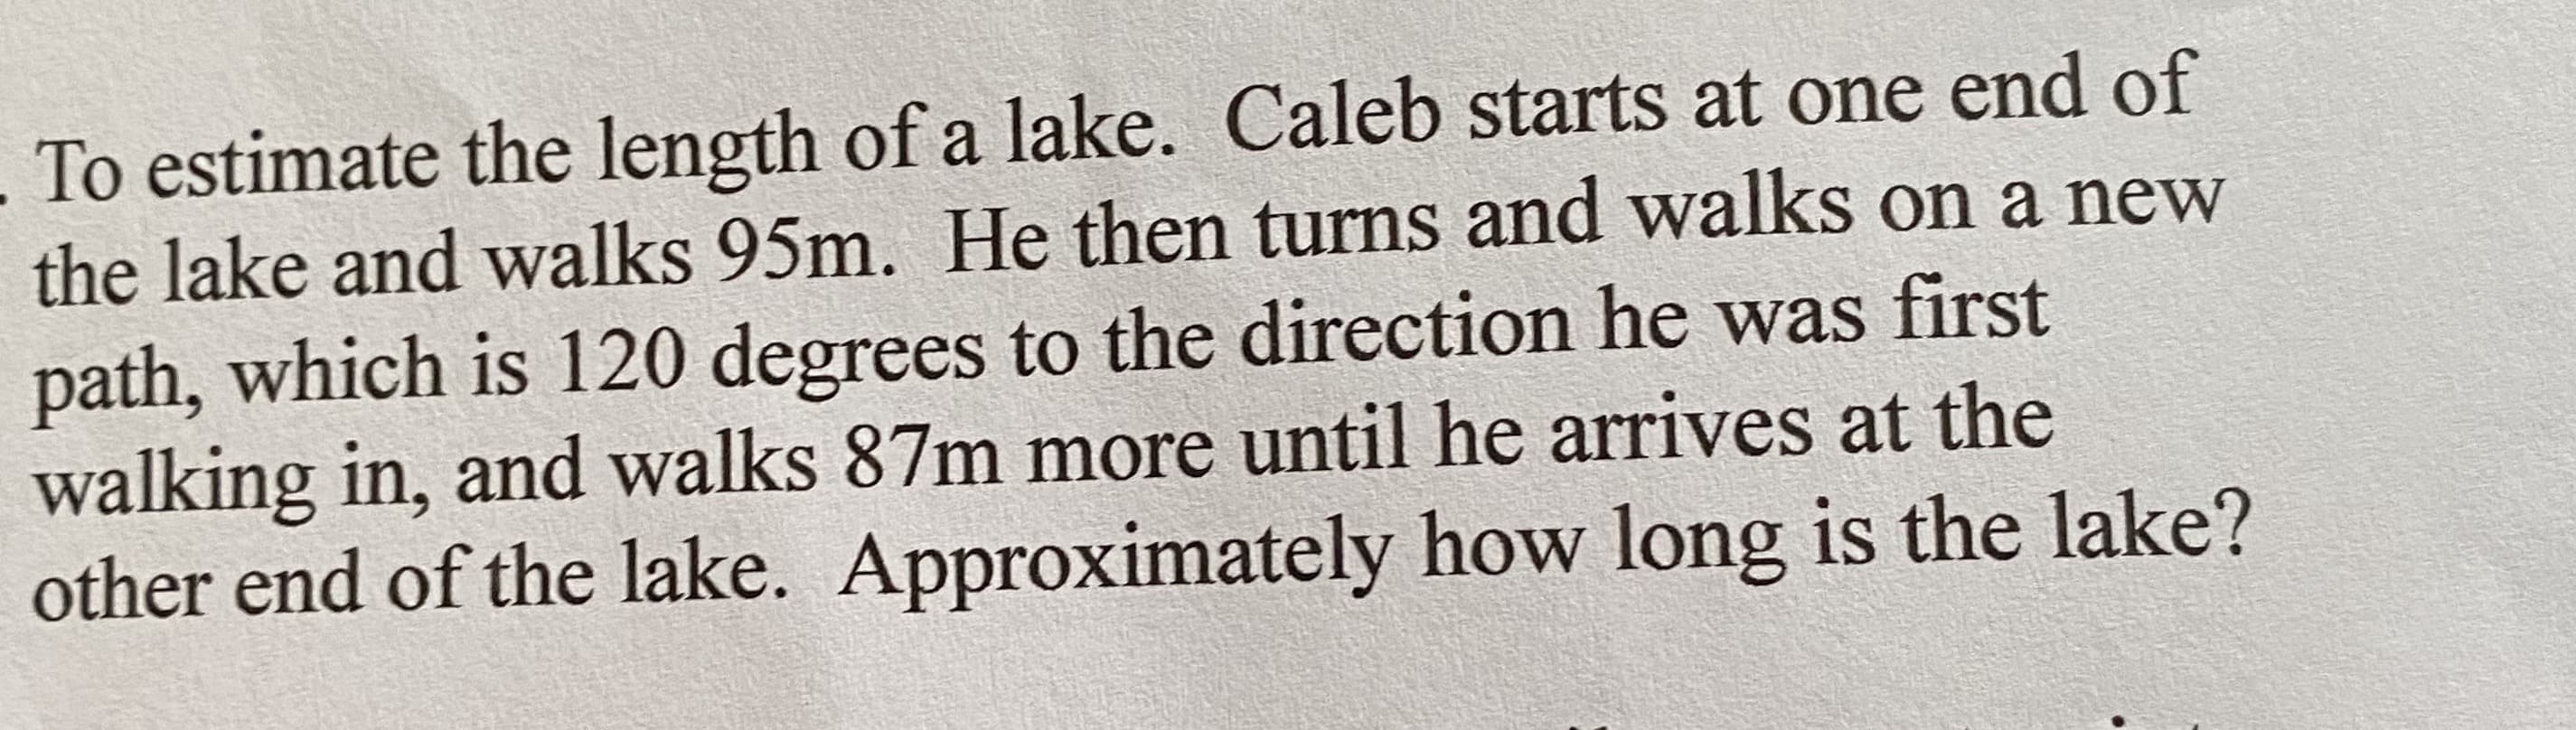 To estimate the length of a lake. Caleb starts at one end of
the lake and walks 95m. He then turns and walks on a new
path, which is 120 degrees to the direction he was first
walking in, and walks 87m more until he arrives at the
other end of the lake. Approximately how long is the lake?
